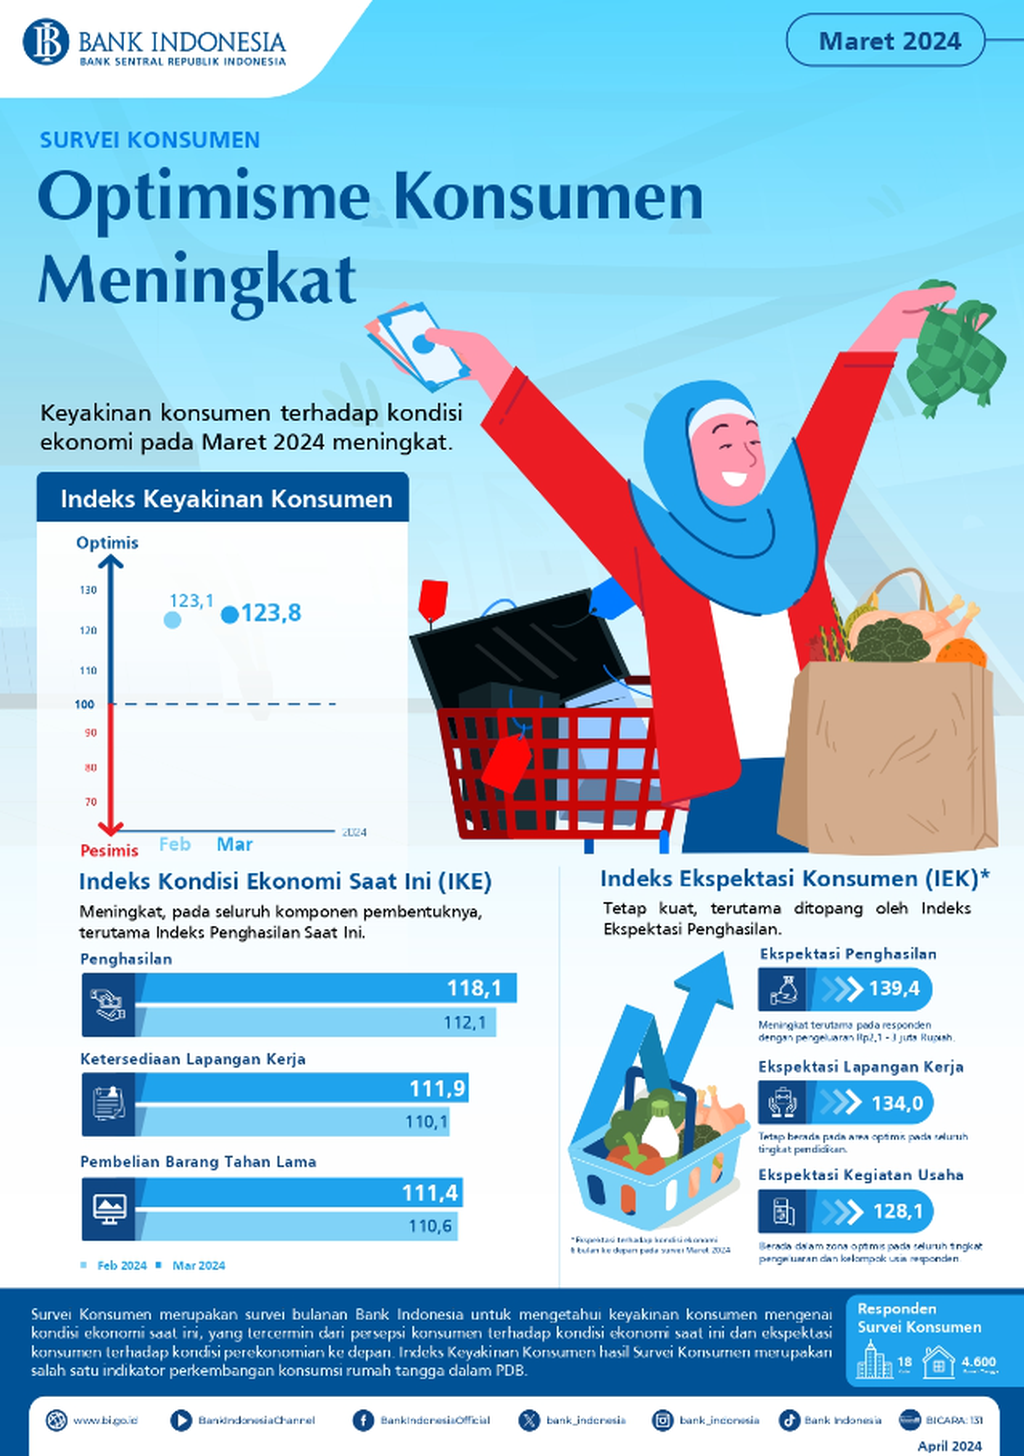 The infographic shows the results of Bank Indonesia's Consumer Survey in March 2024. The survey indicates an increase in consumer confidence in March 2024 by 123.8 basis points (source: Bank Indonesia).